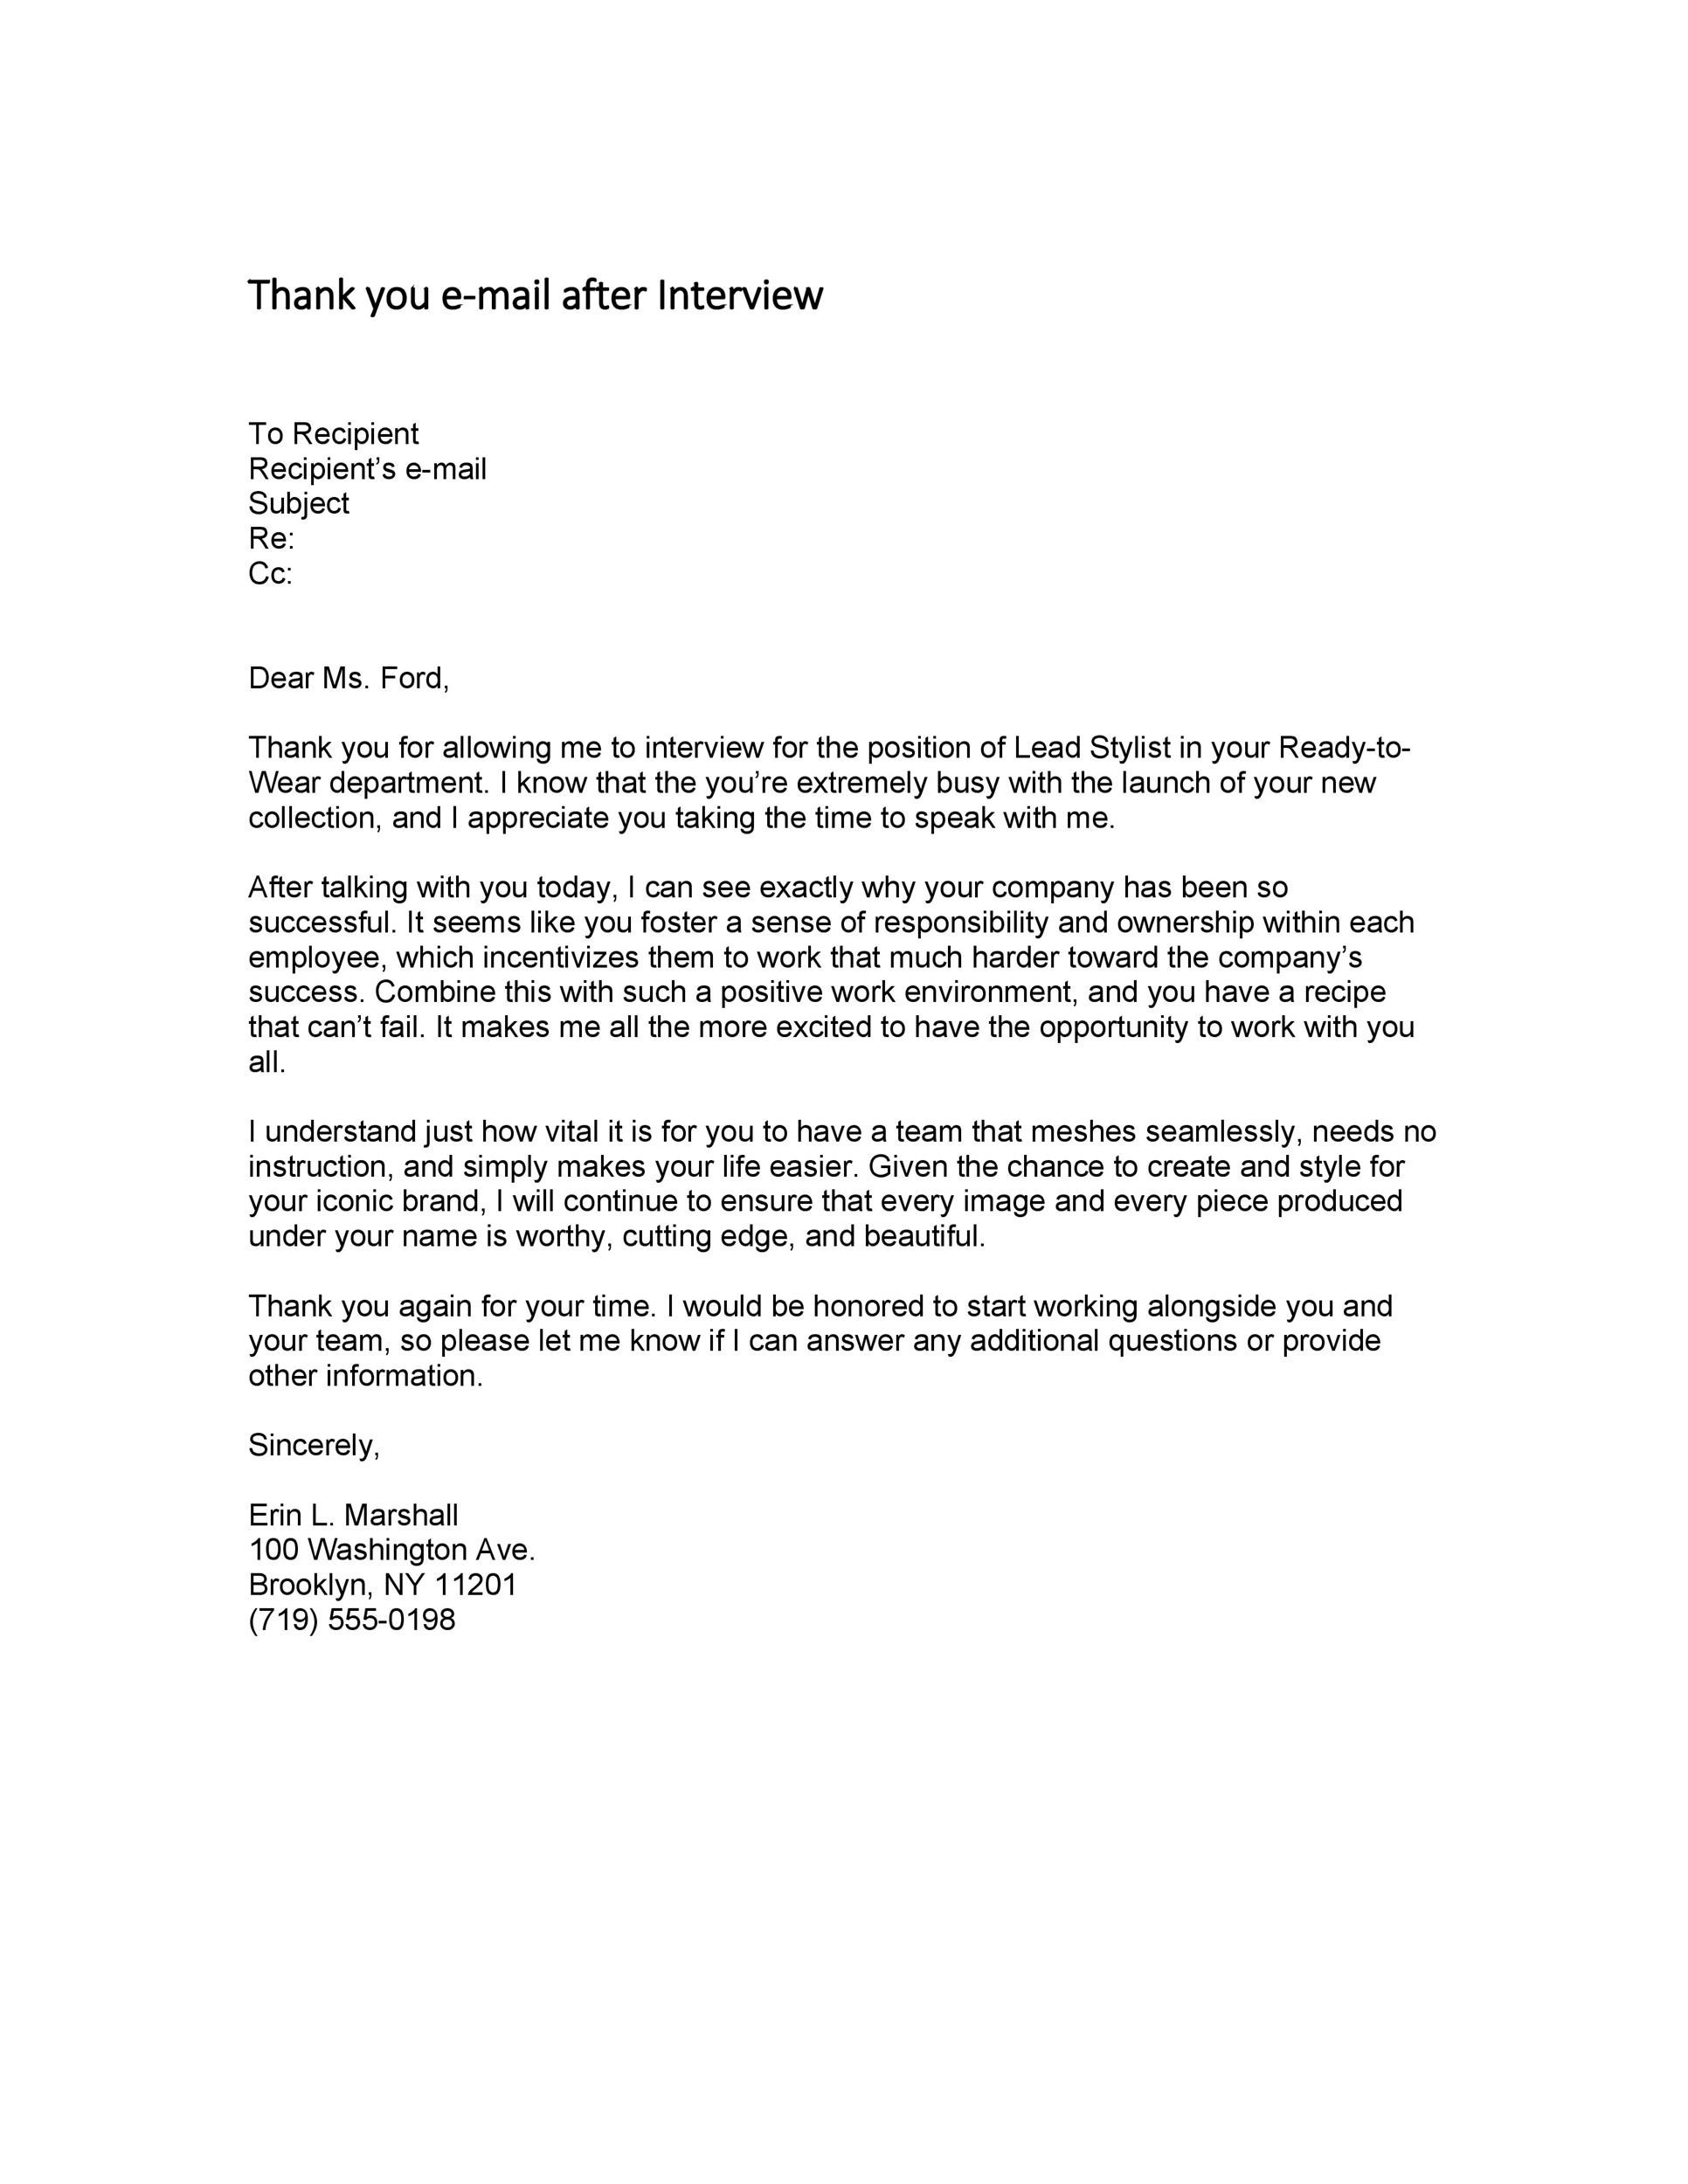 Thank You Interview Letter Templates from templatelab.com